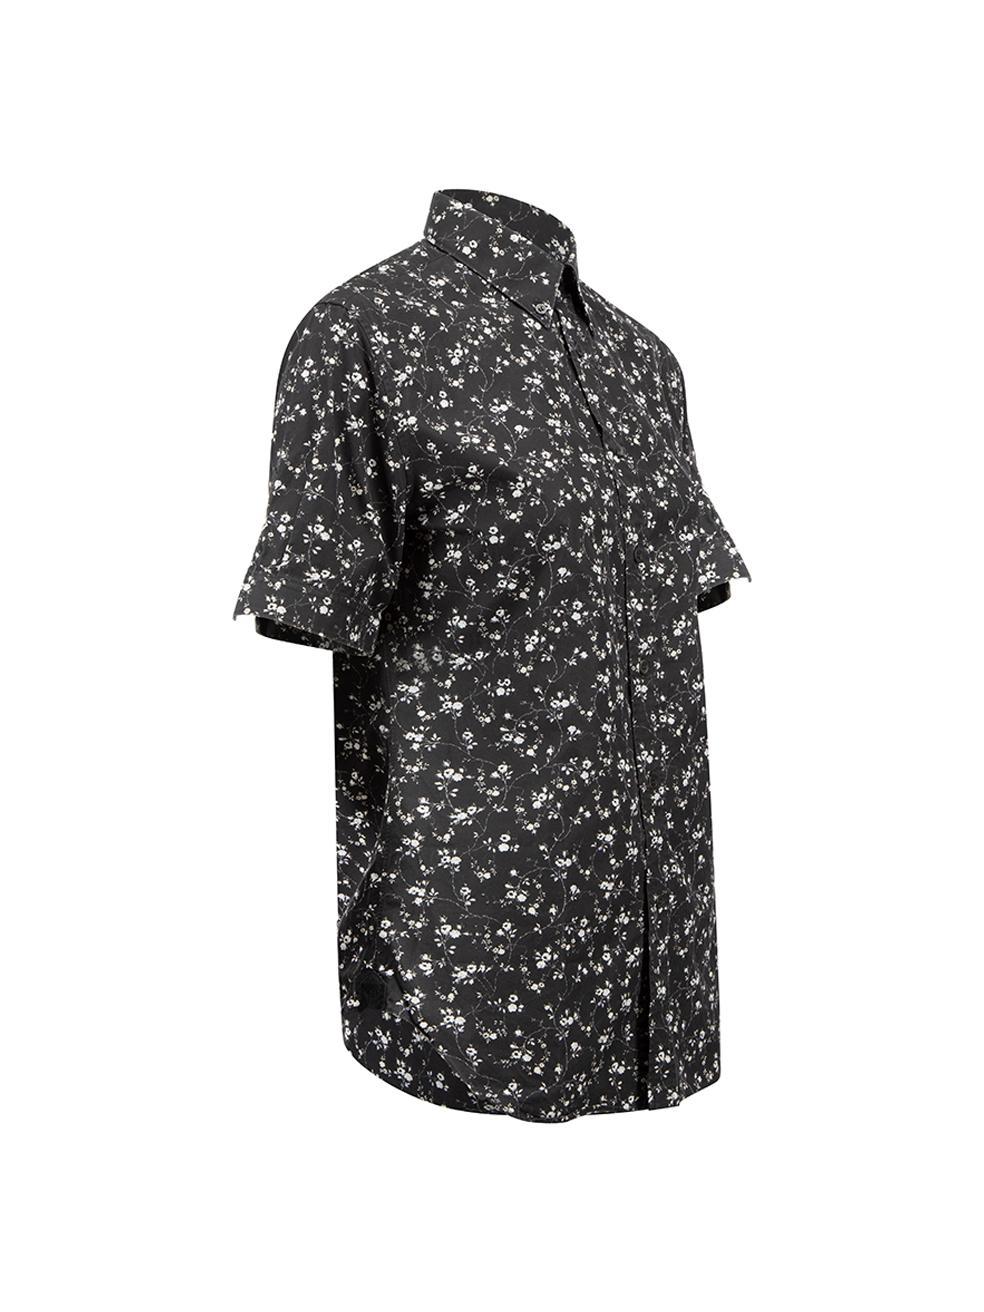 CONDITION is Very good. Minimal wear to shirt is evident. Light fading to back of collar on this used Alexander McQueen designer resale item.



Details


Black

Cotton

Shirt

White floral pattern

Short sleeves

Button up fastening





Made in